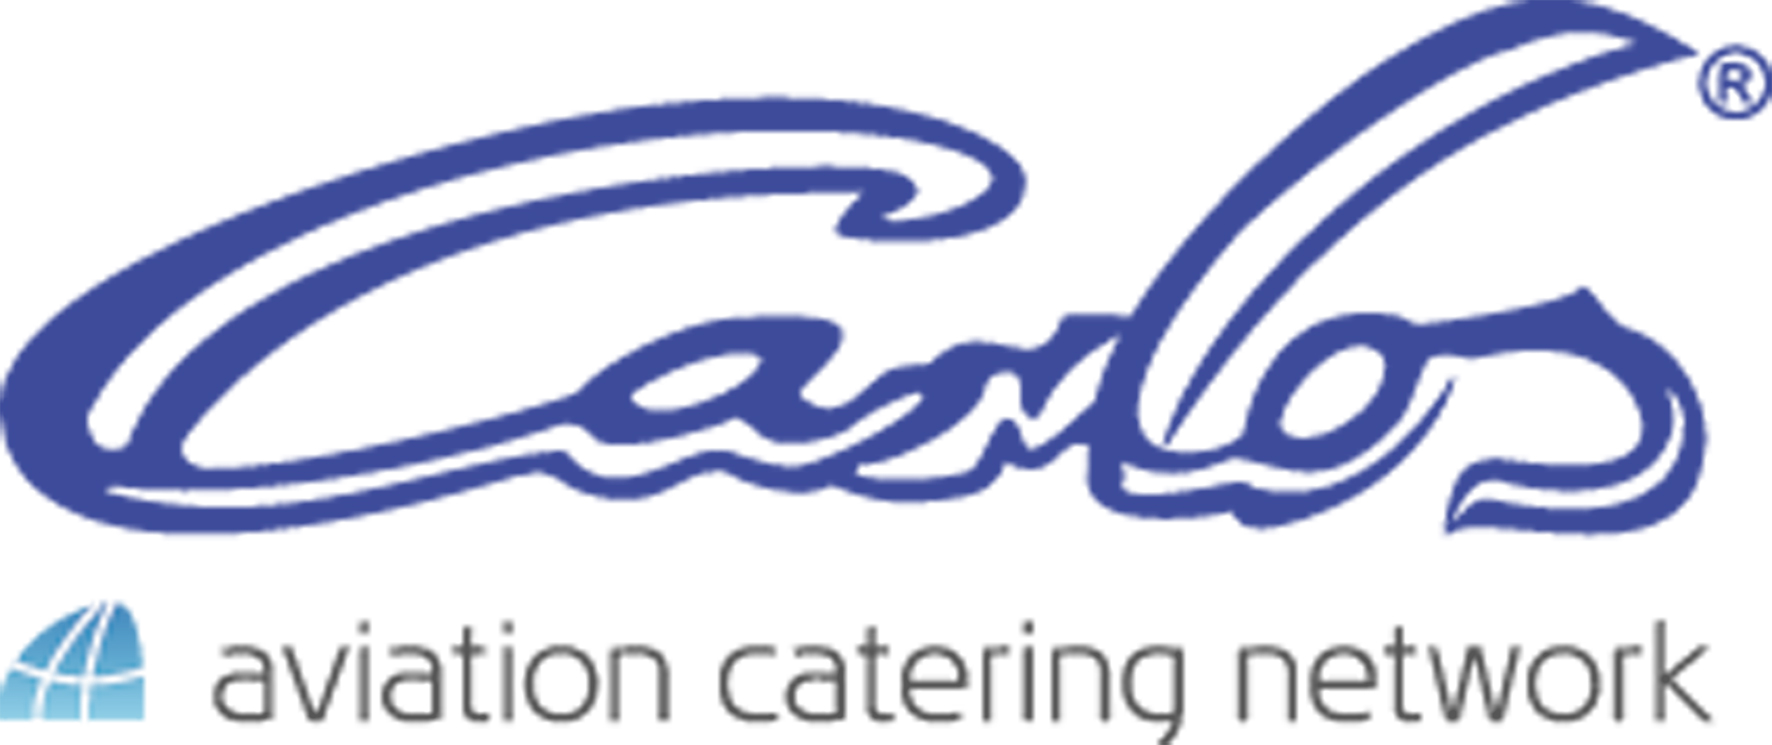 CARLOS AVIATION CATERING NETWORK